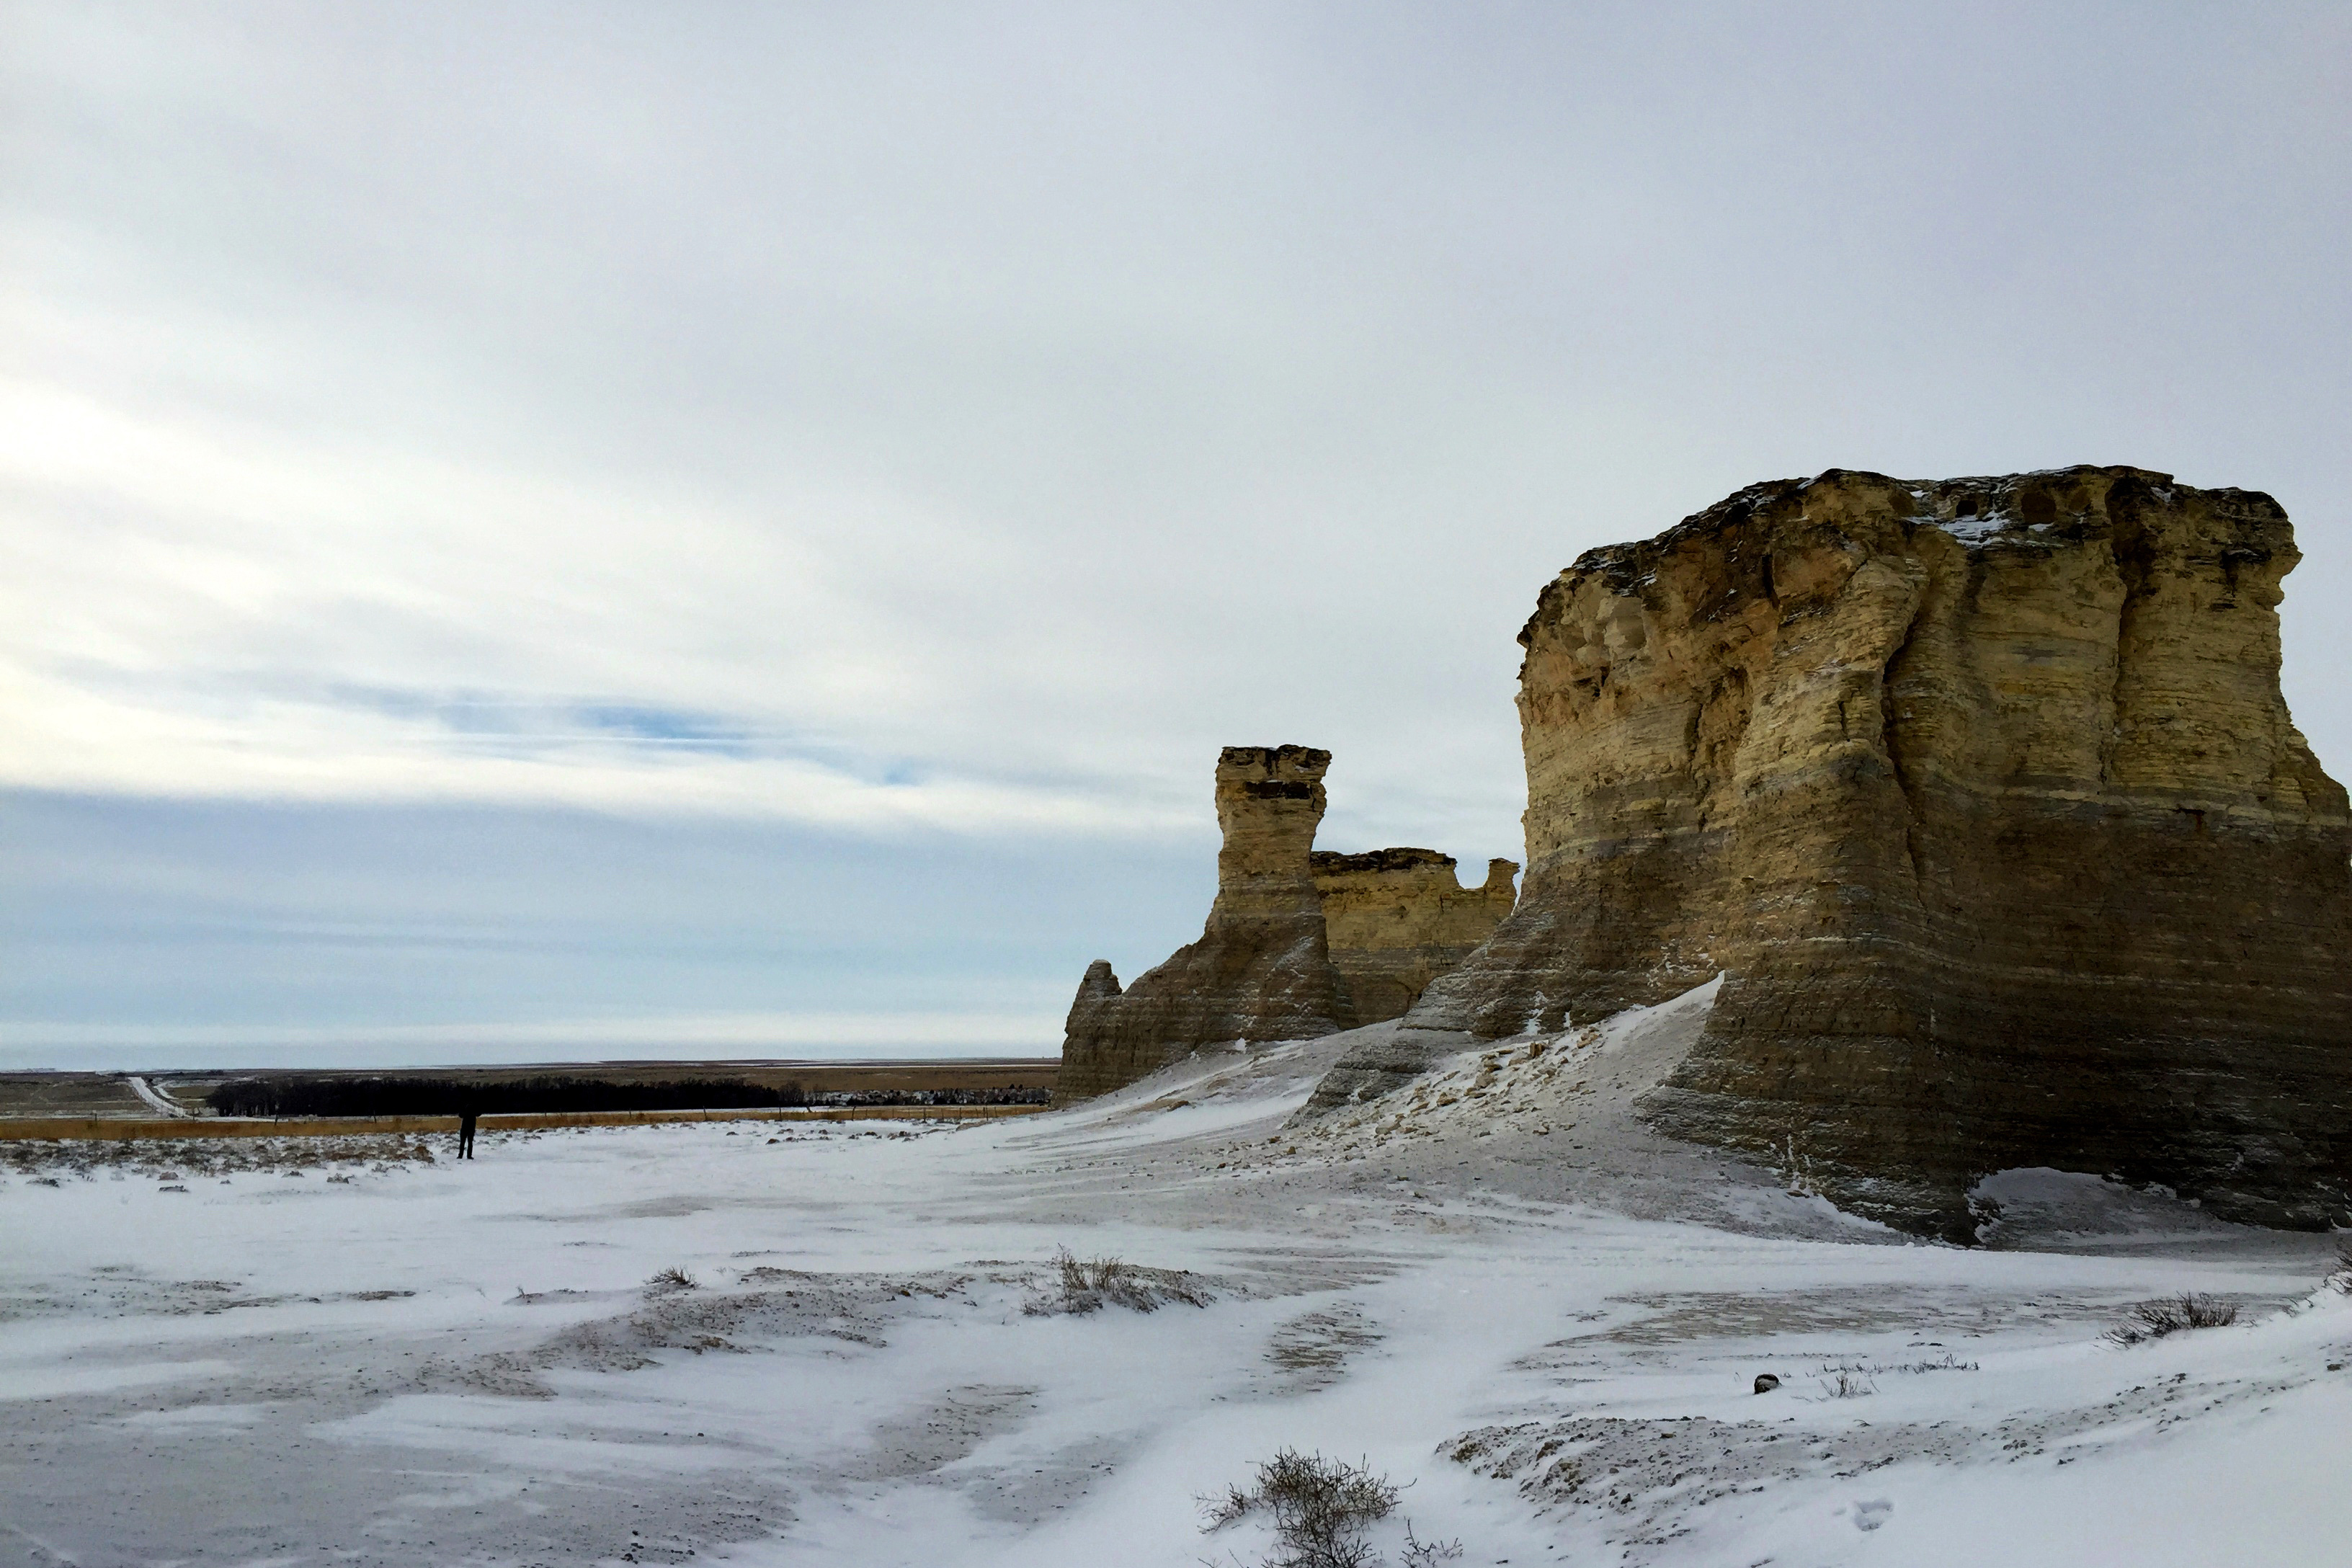 Some of the chalk formations are 70ft tall. Image by Lauren Wellicome / Lonely Planet